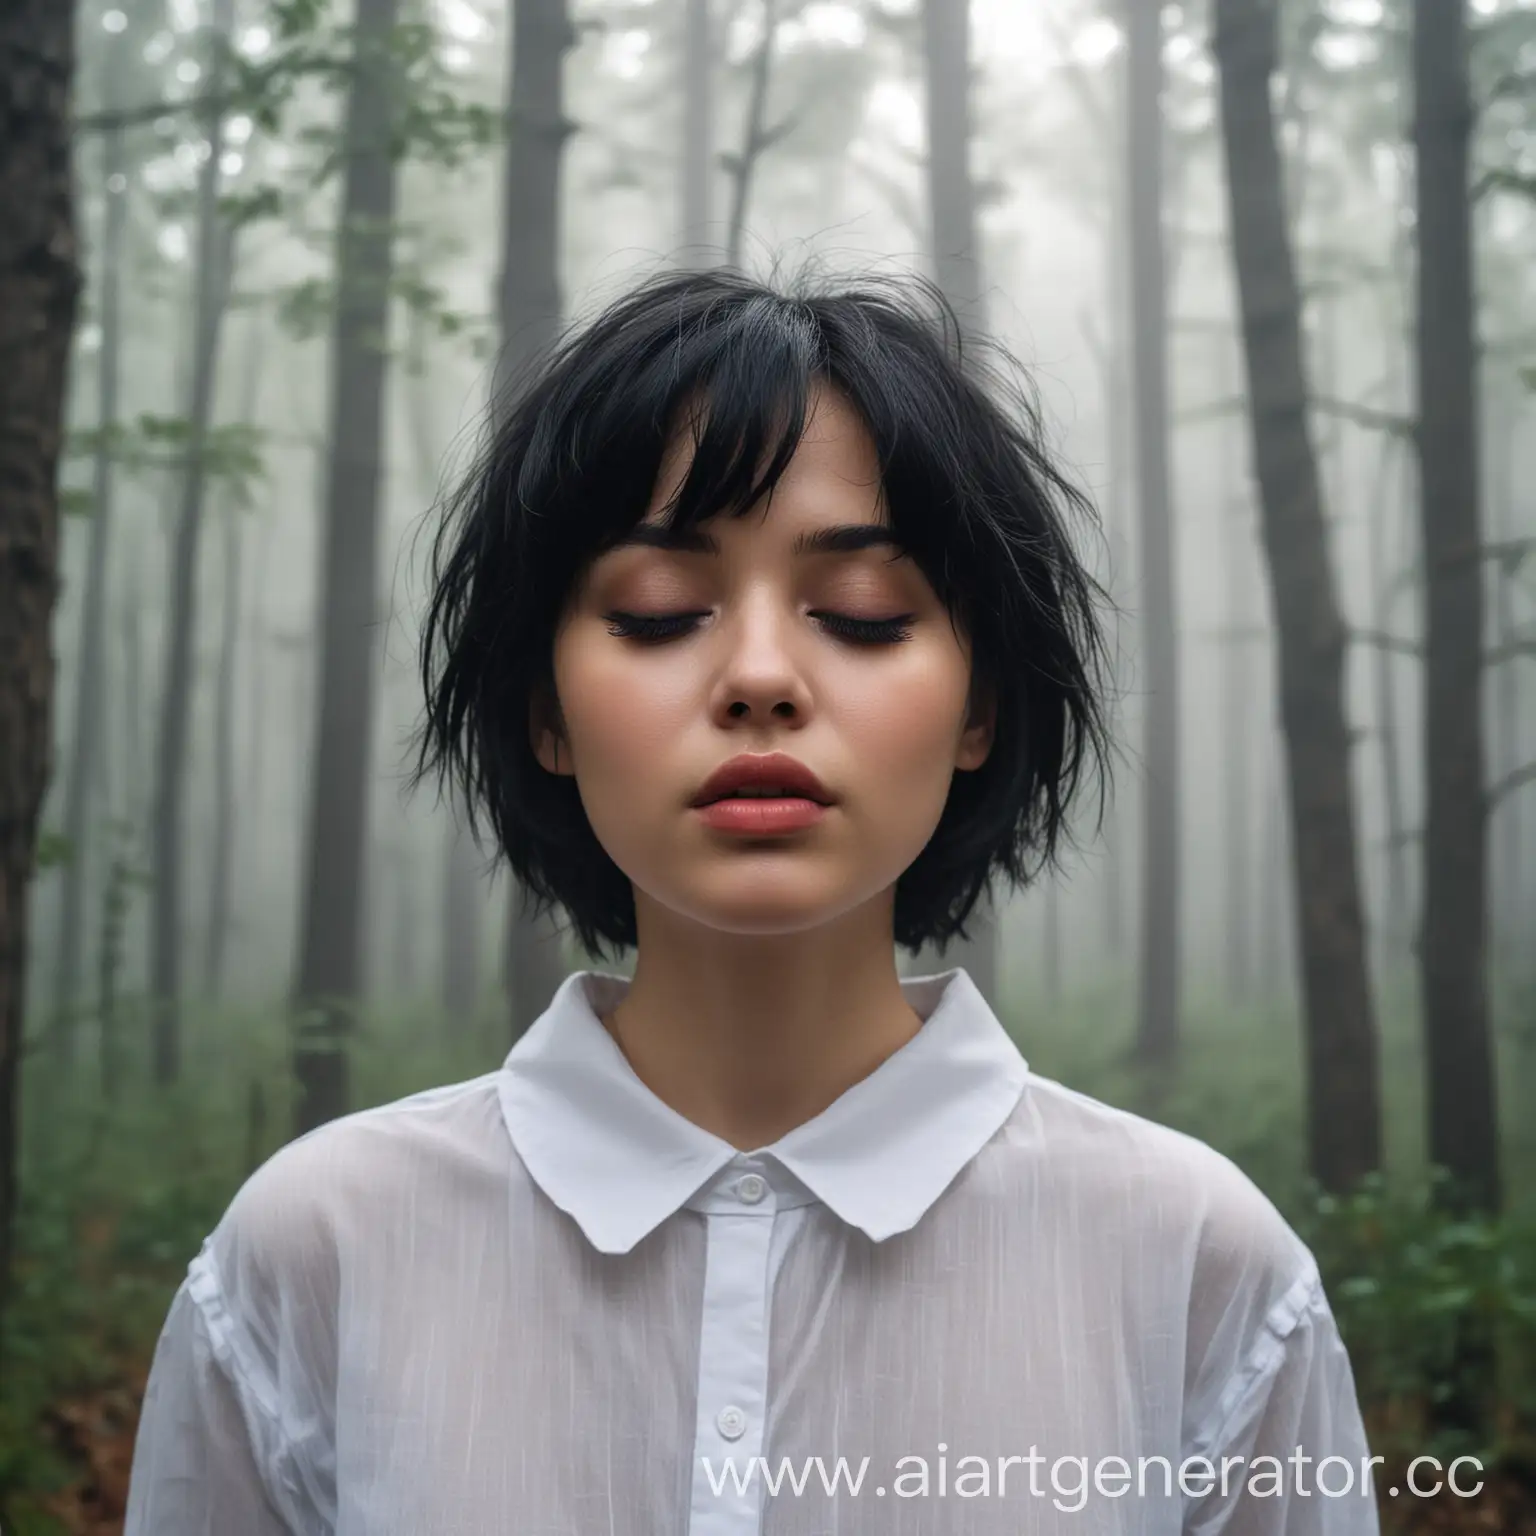 Dreamy-Girl-in-Foggy-Forest-with-Closed-Eyes